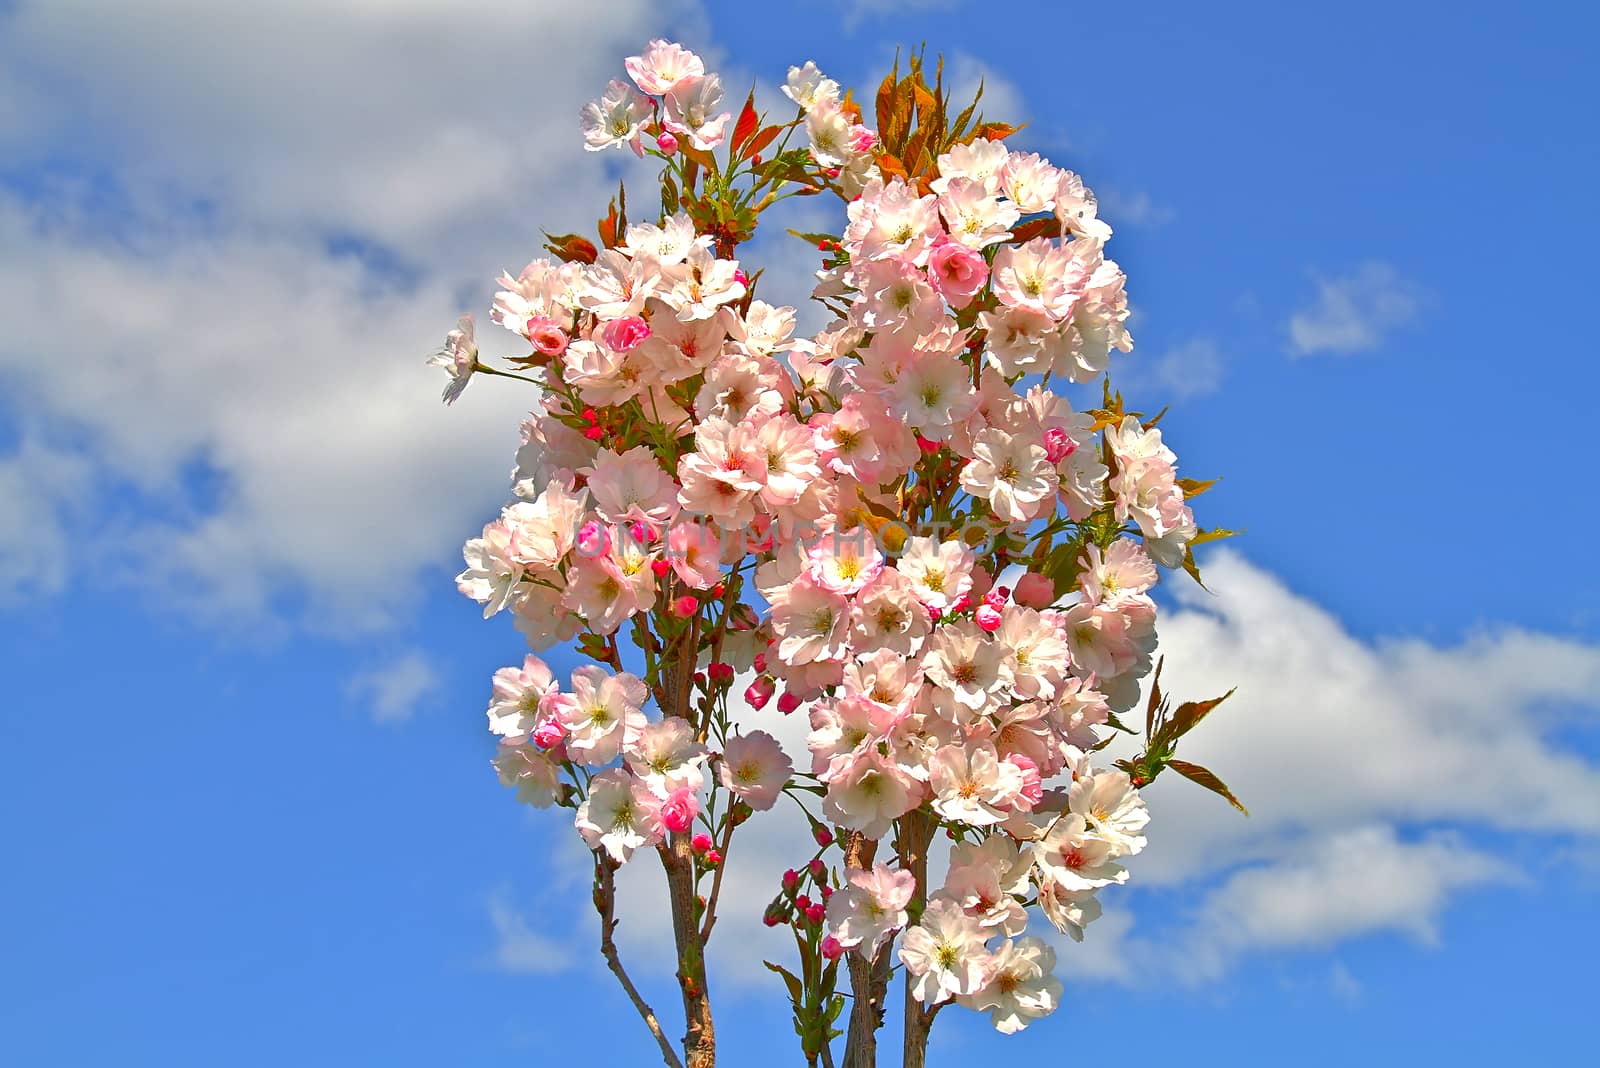 Japanese cherry blossom and a beautiful blue summer sky as background.